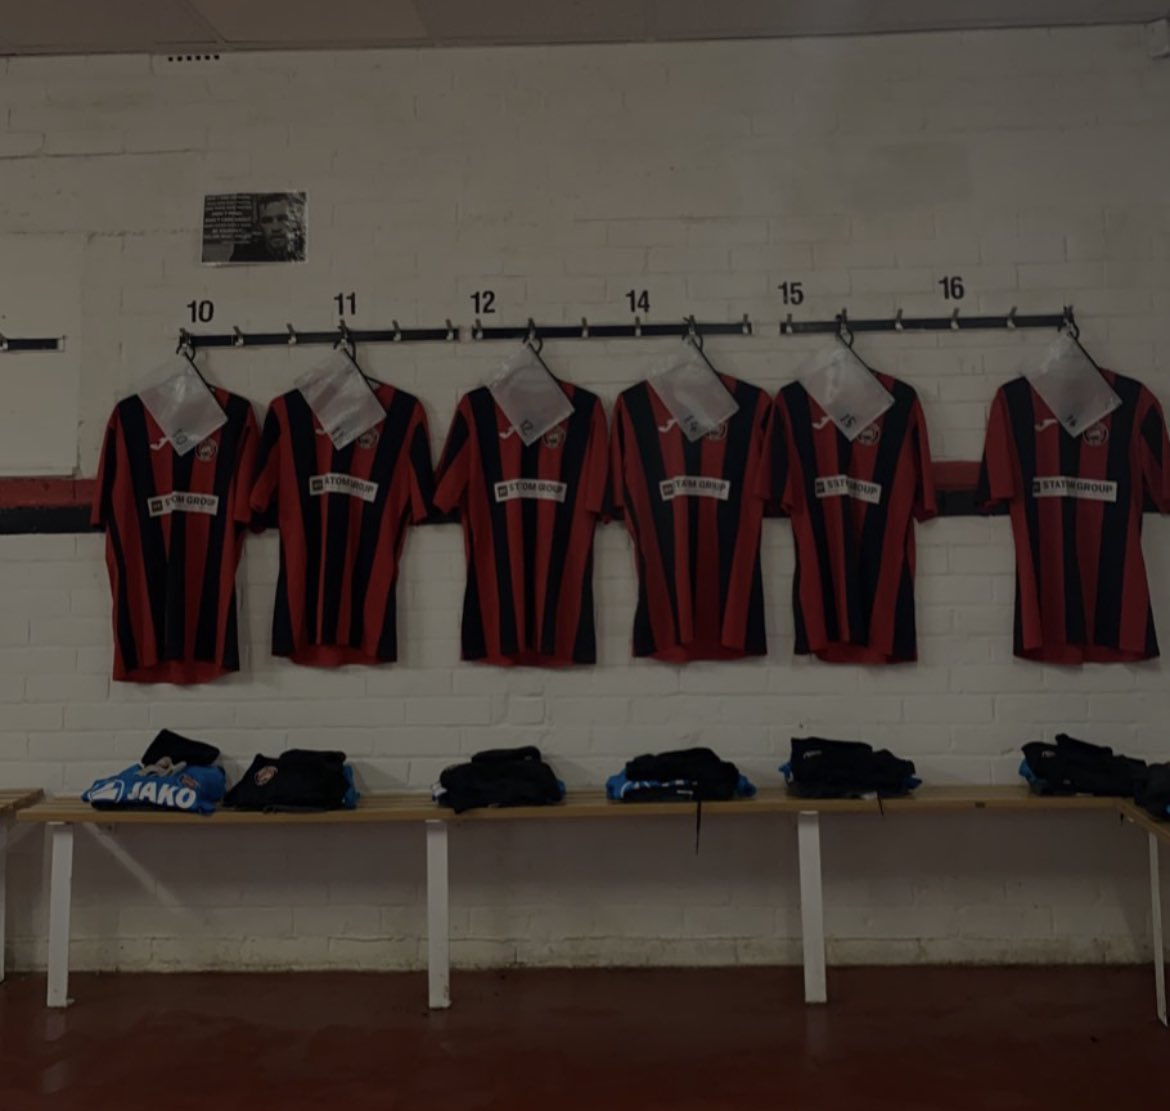 So tomorrow marks the end of the 22/23 football season for my @ErithTown football family. Sat reflecting on a great season. I am immensely proud of what the team have achieved this season and so they should be too. One final push! #myteam #upthedockers